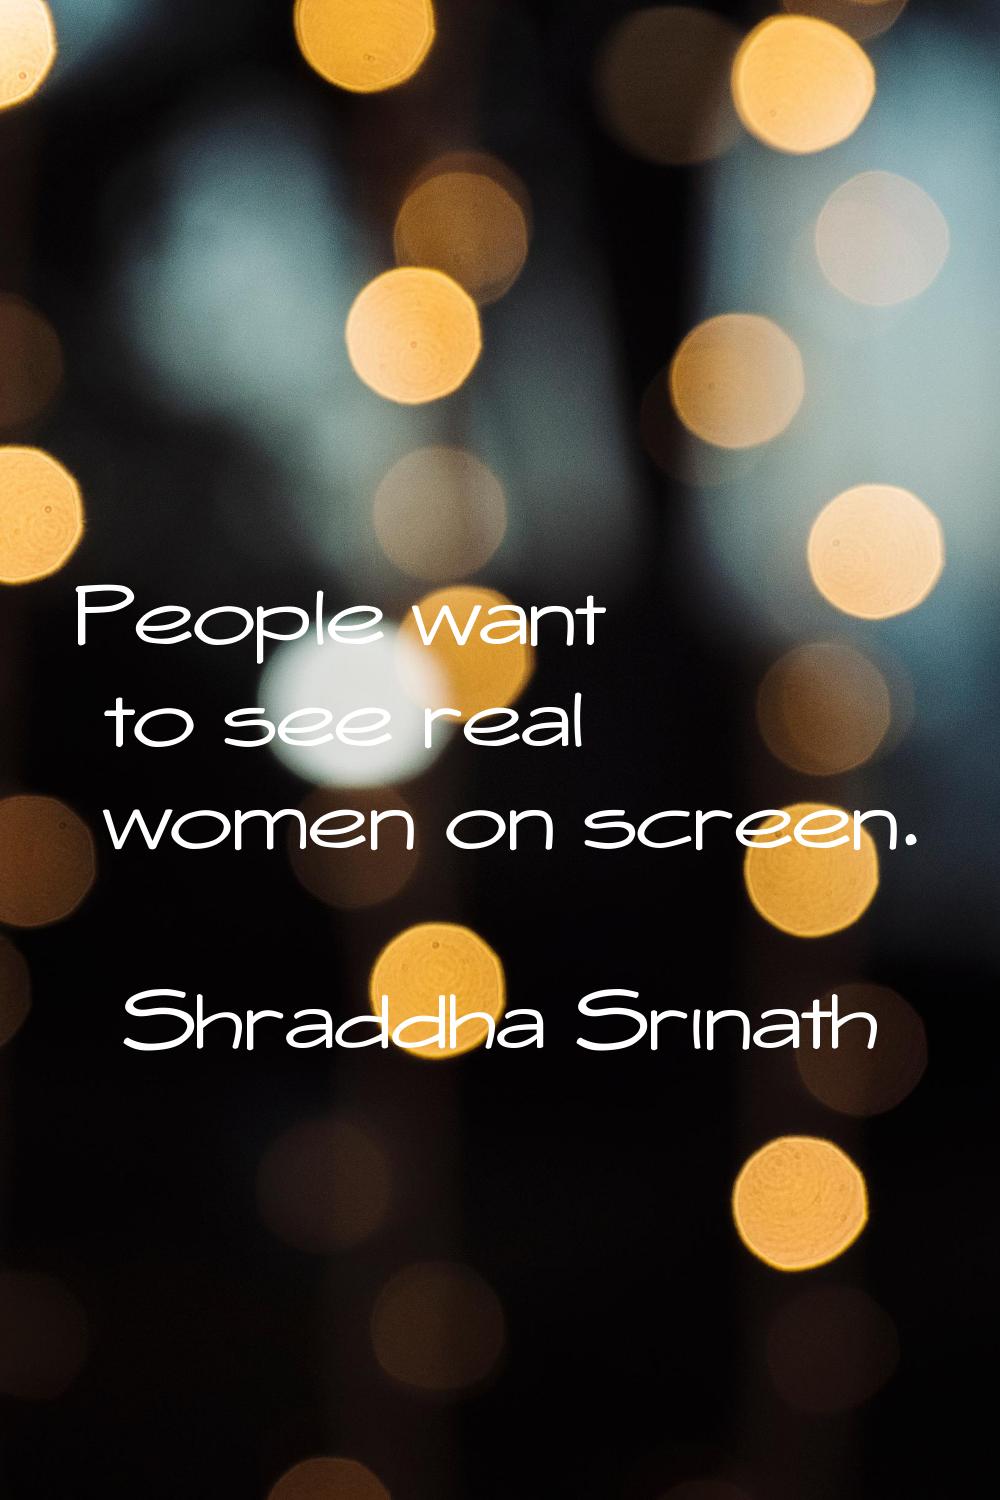 People want to see real women on screen.